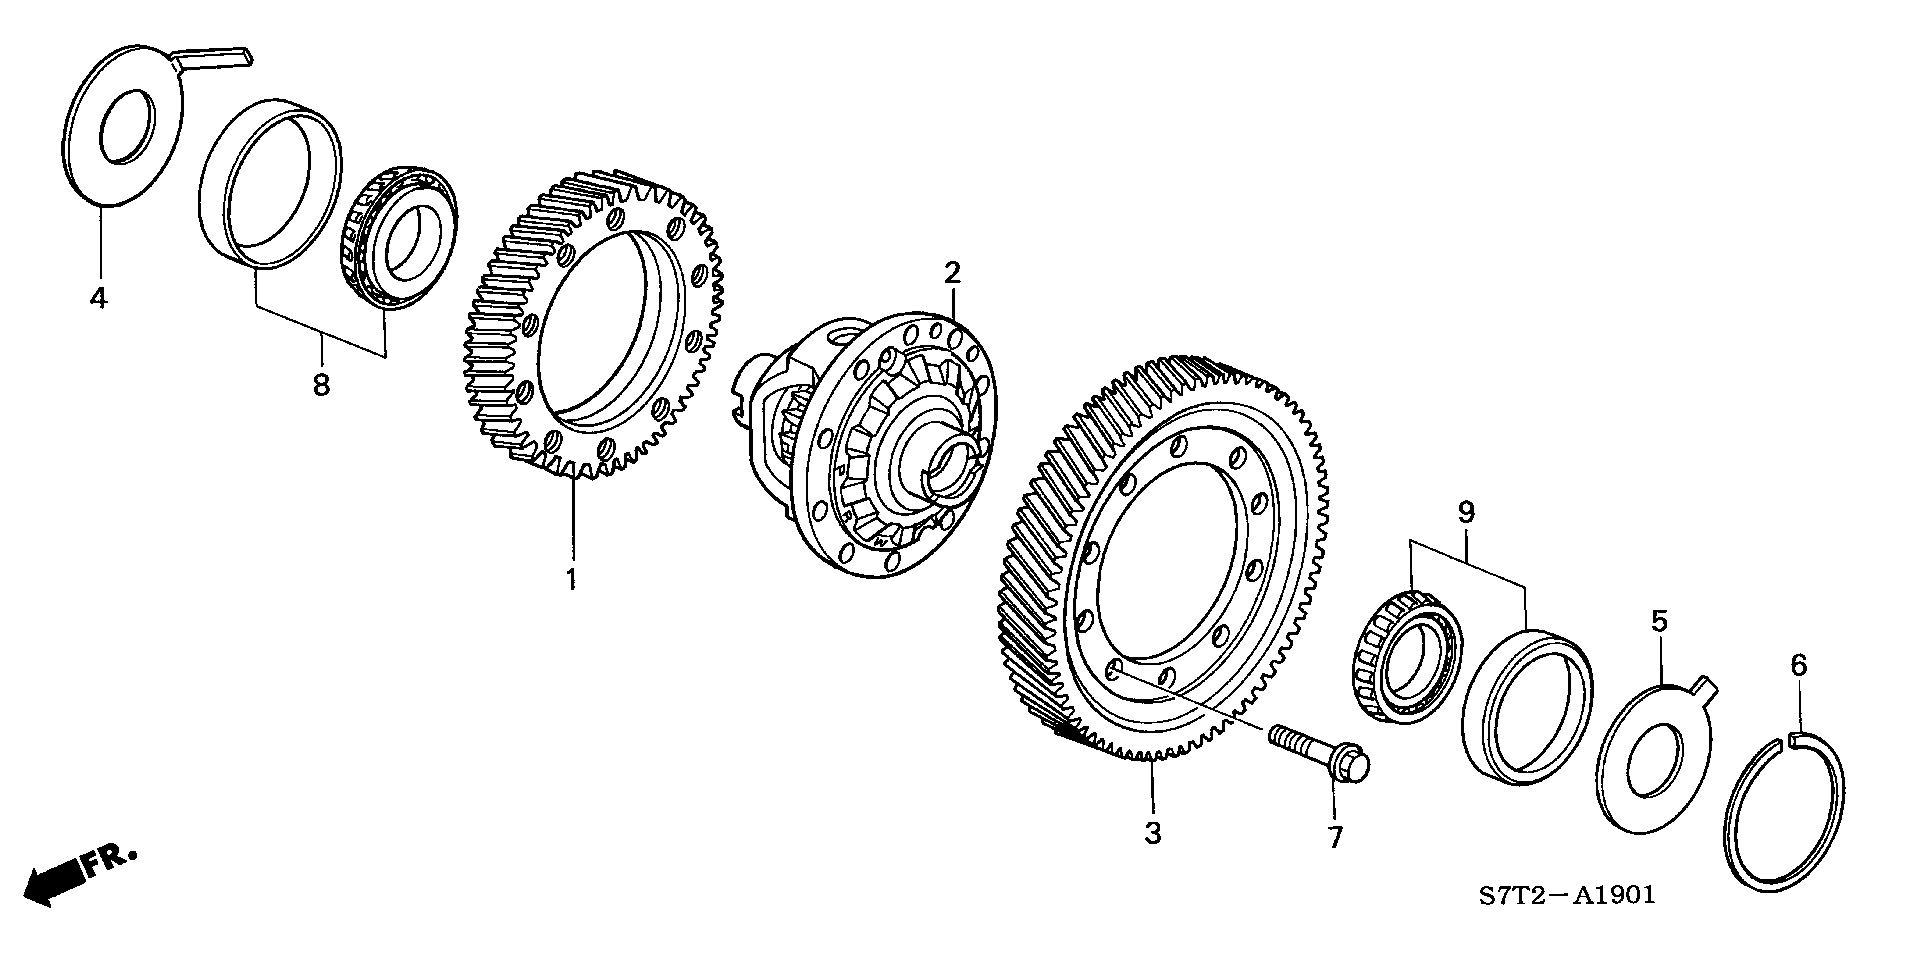 DIFFERENTIAL(4WD) (5AT)